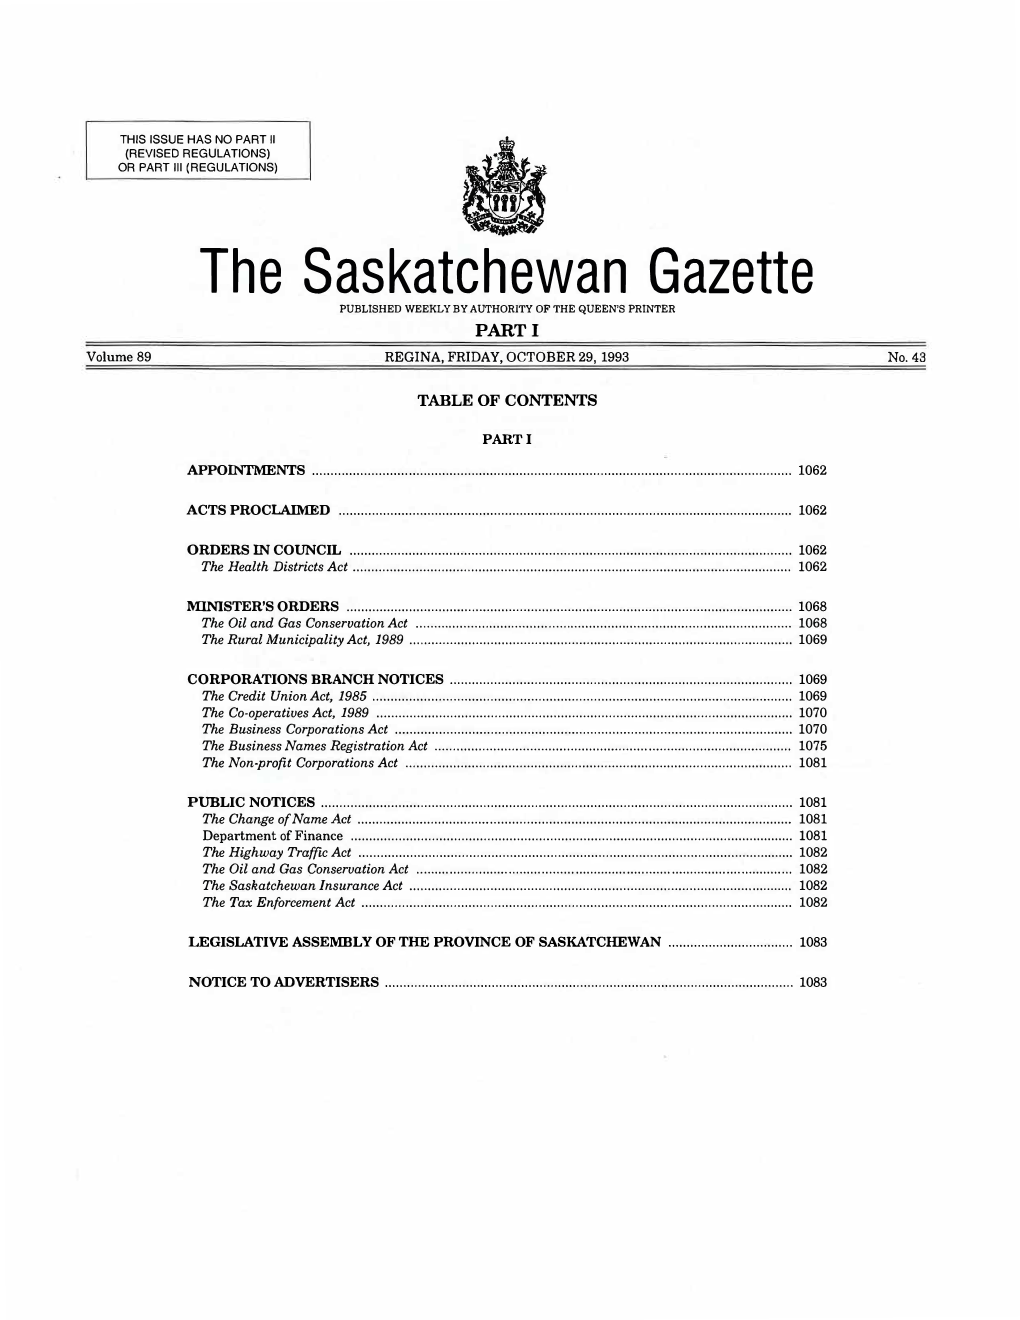 The Saskatchewan Gazette PUBLISHED WEEKLY by AUTHORITY of the QUEEN's PRINTER PART I Volume 89 REGINA, FRIDAY, OCTOBER 29, 1993 No